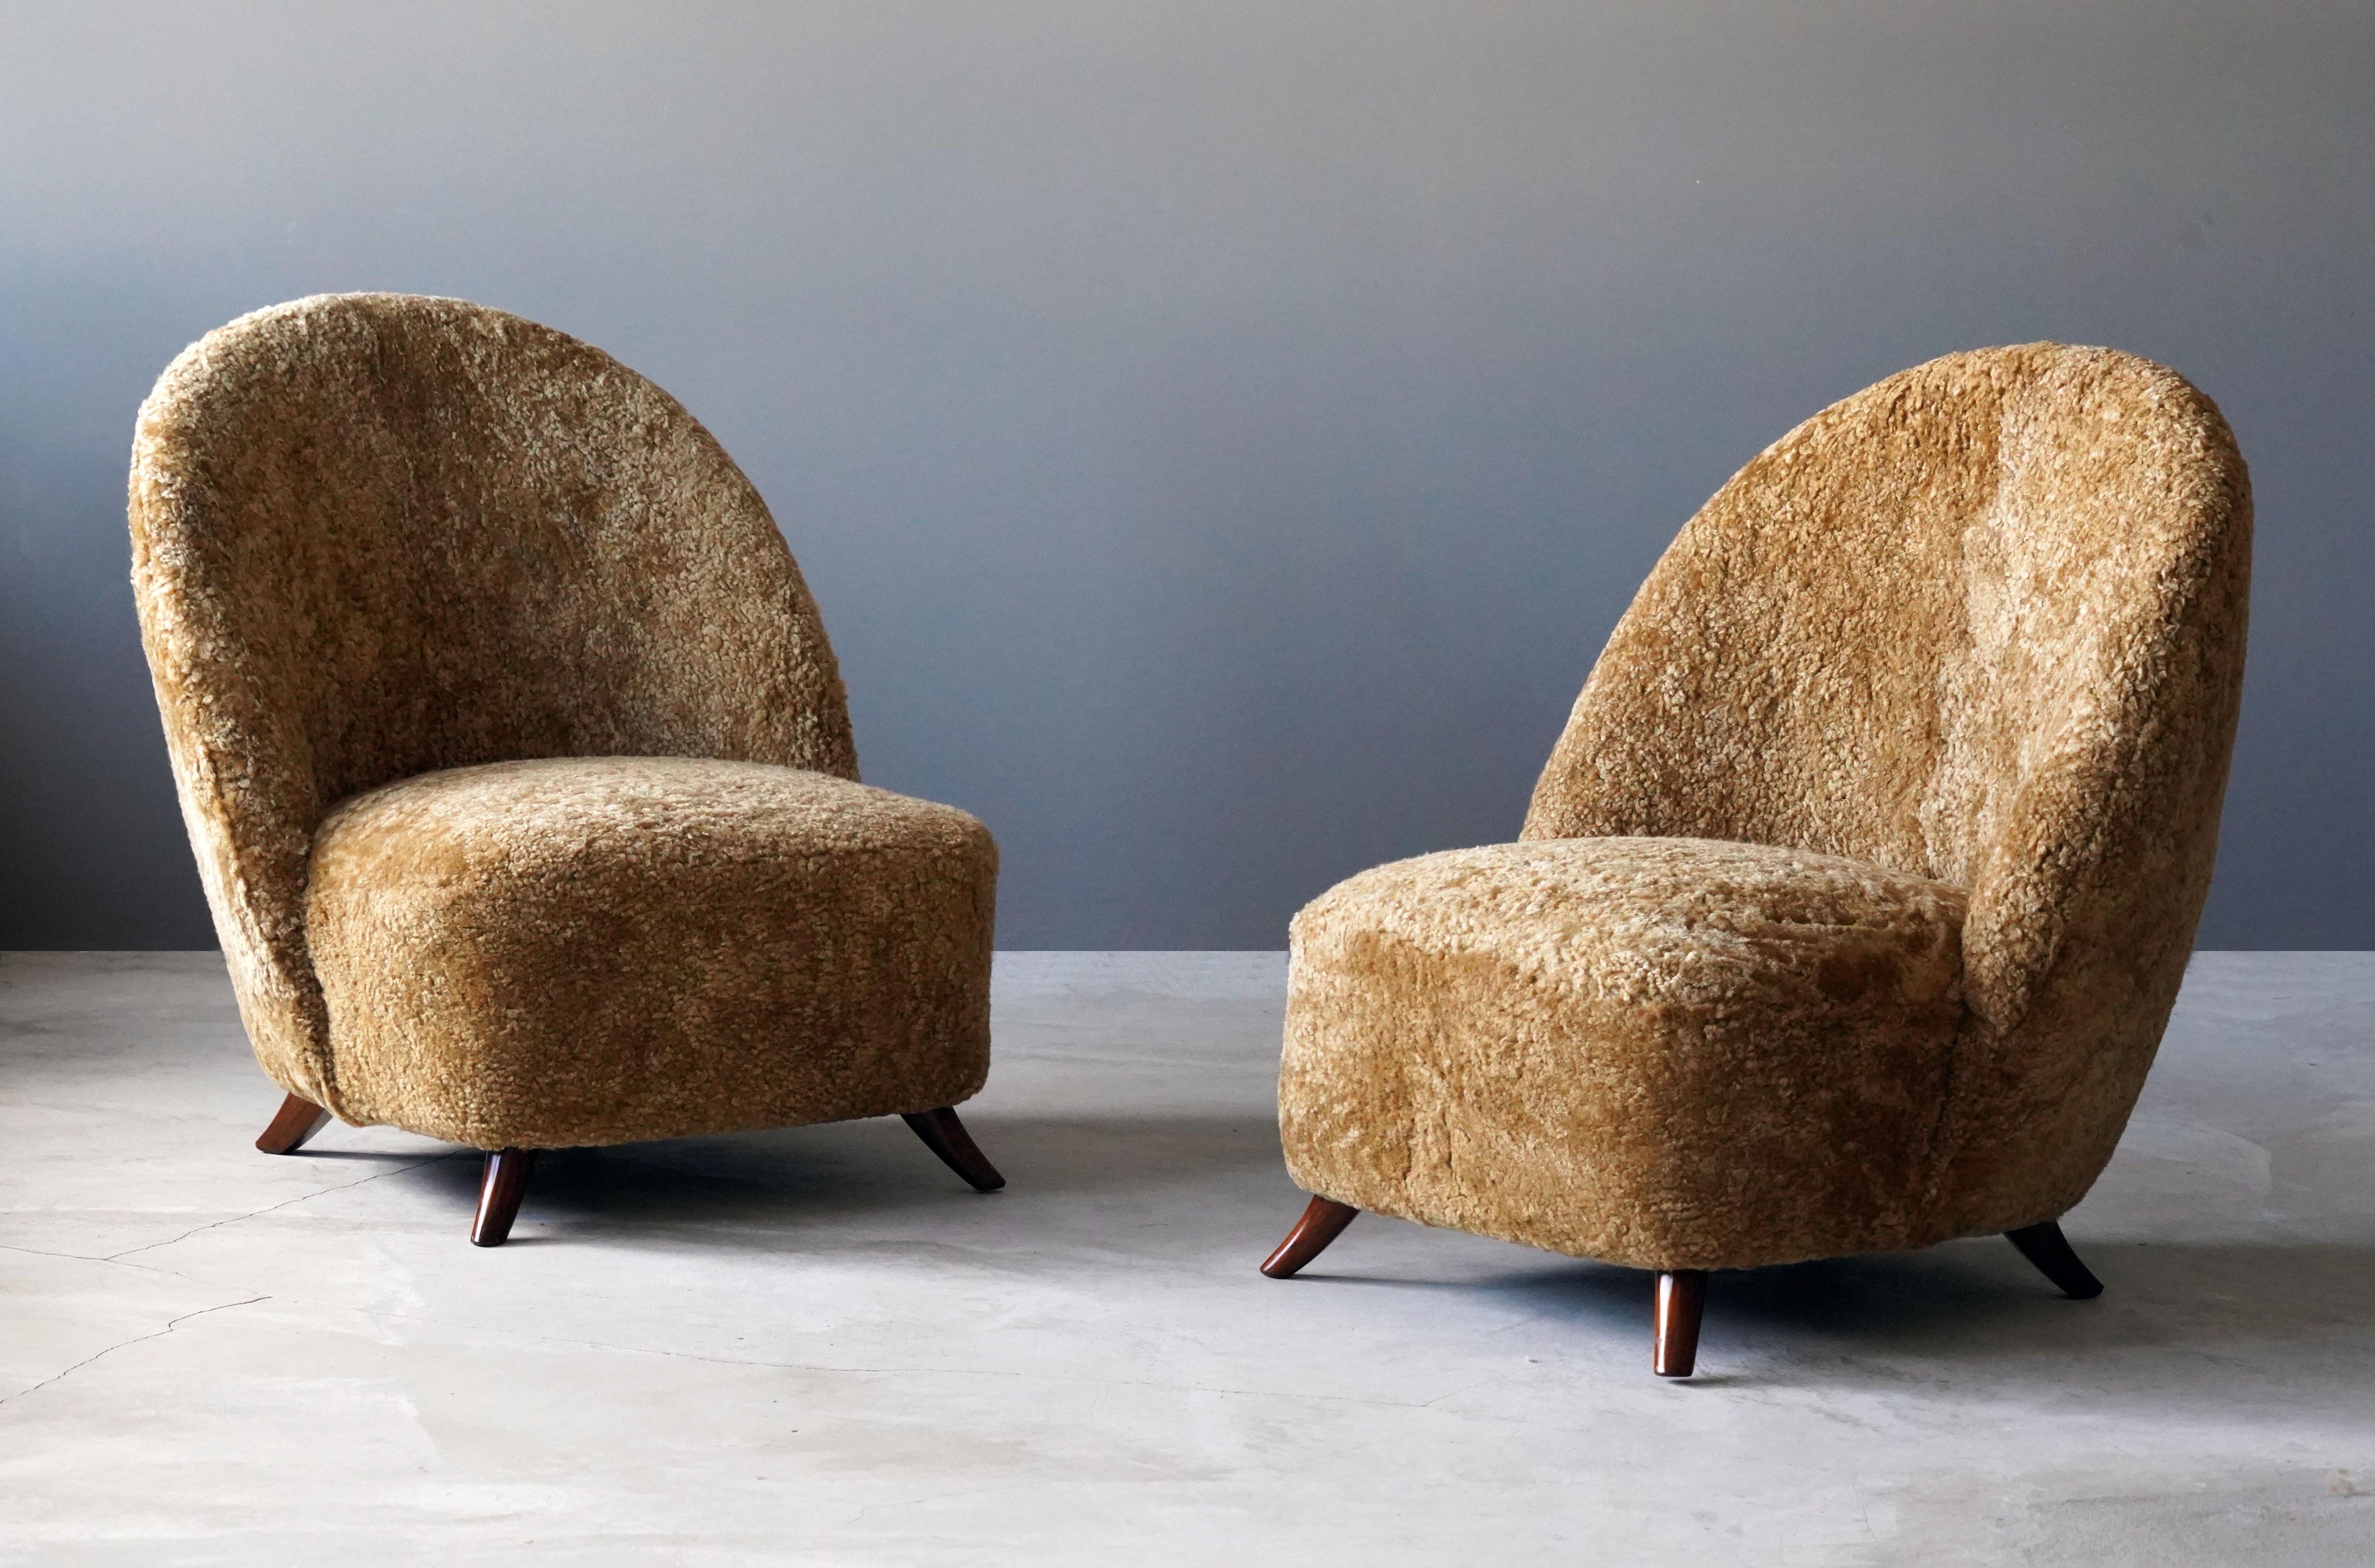 A pair of highly modernist lounge chairs. Designed attributed to Guglielmo Ulrich, produced 1940s, Italy. Features a highly expressive organic form.

Other designers working in the organic style include: Paolo Buffa, Gio Ponti, Flemming Lassen,